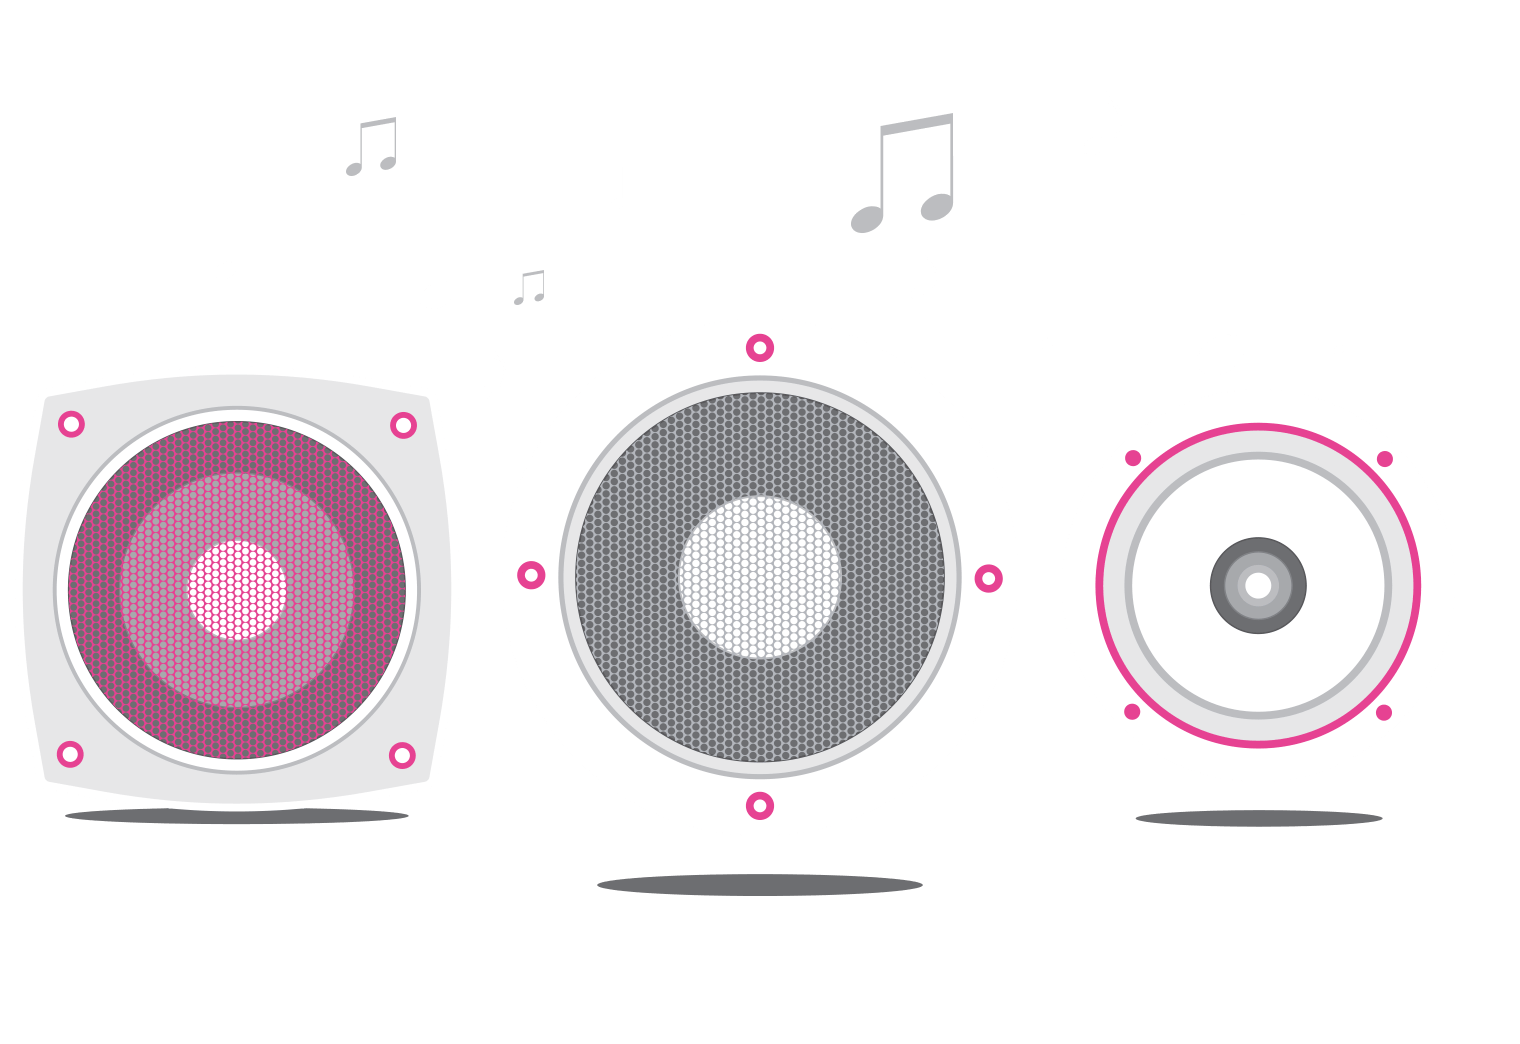 Zuma Speakers are Revolutionising Home Audio Projects for Installers